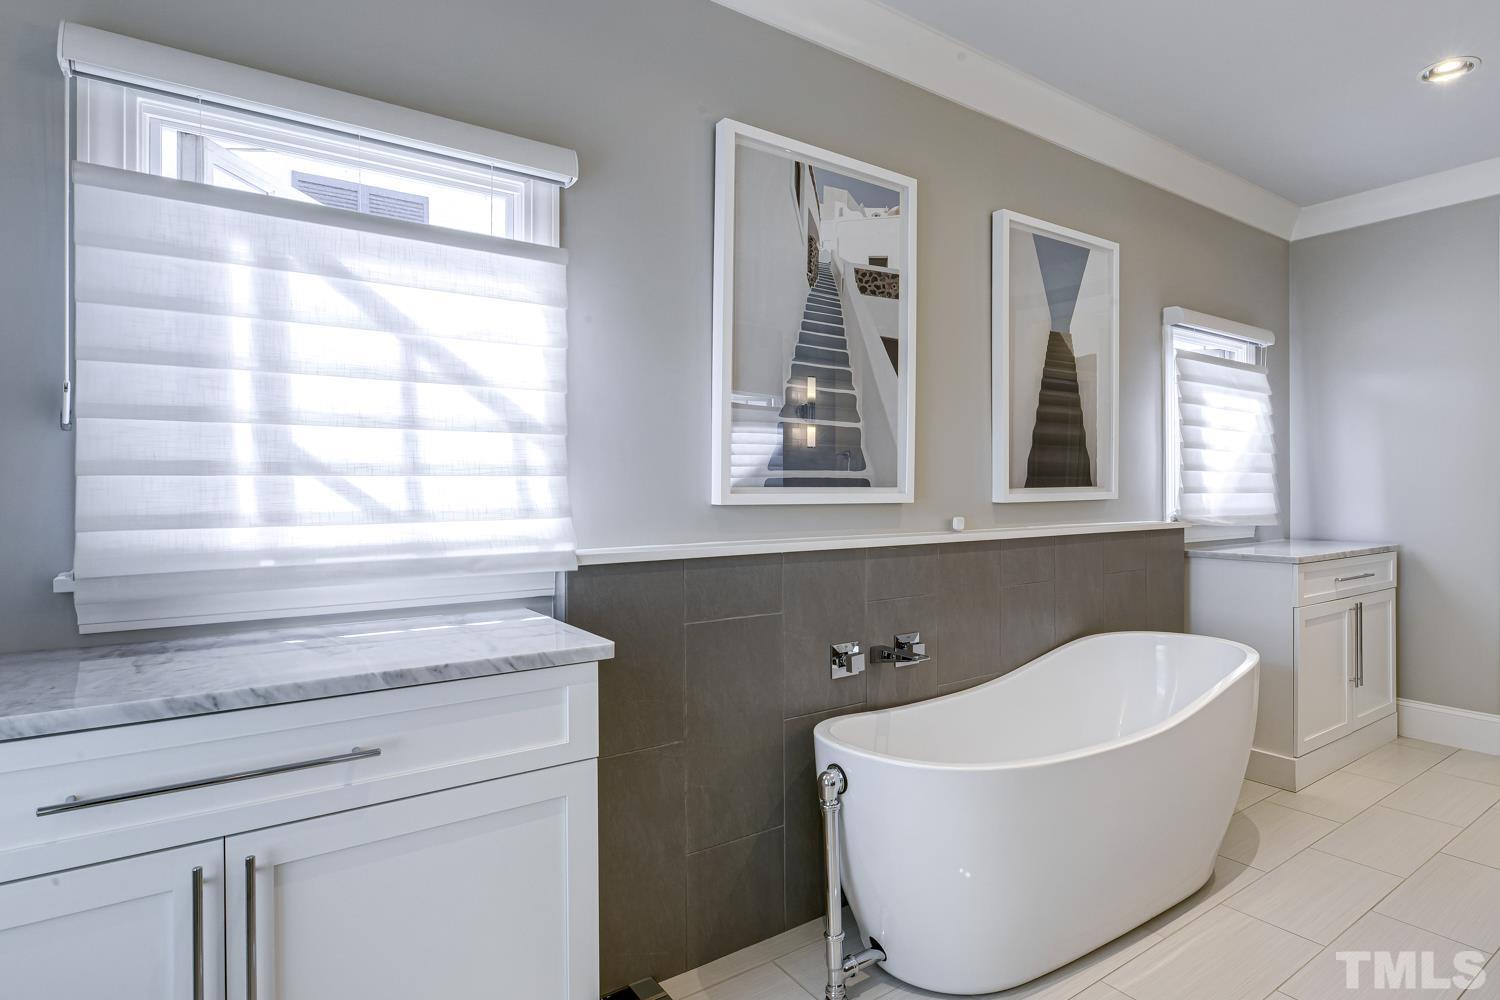 Soaking TUB -it will become one of your favorite spots to relax after a long day!